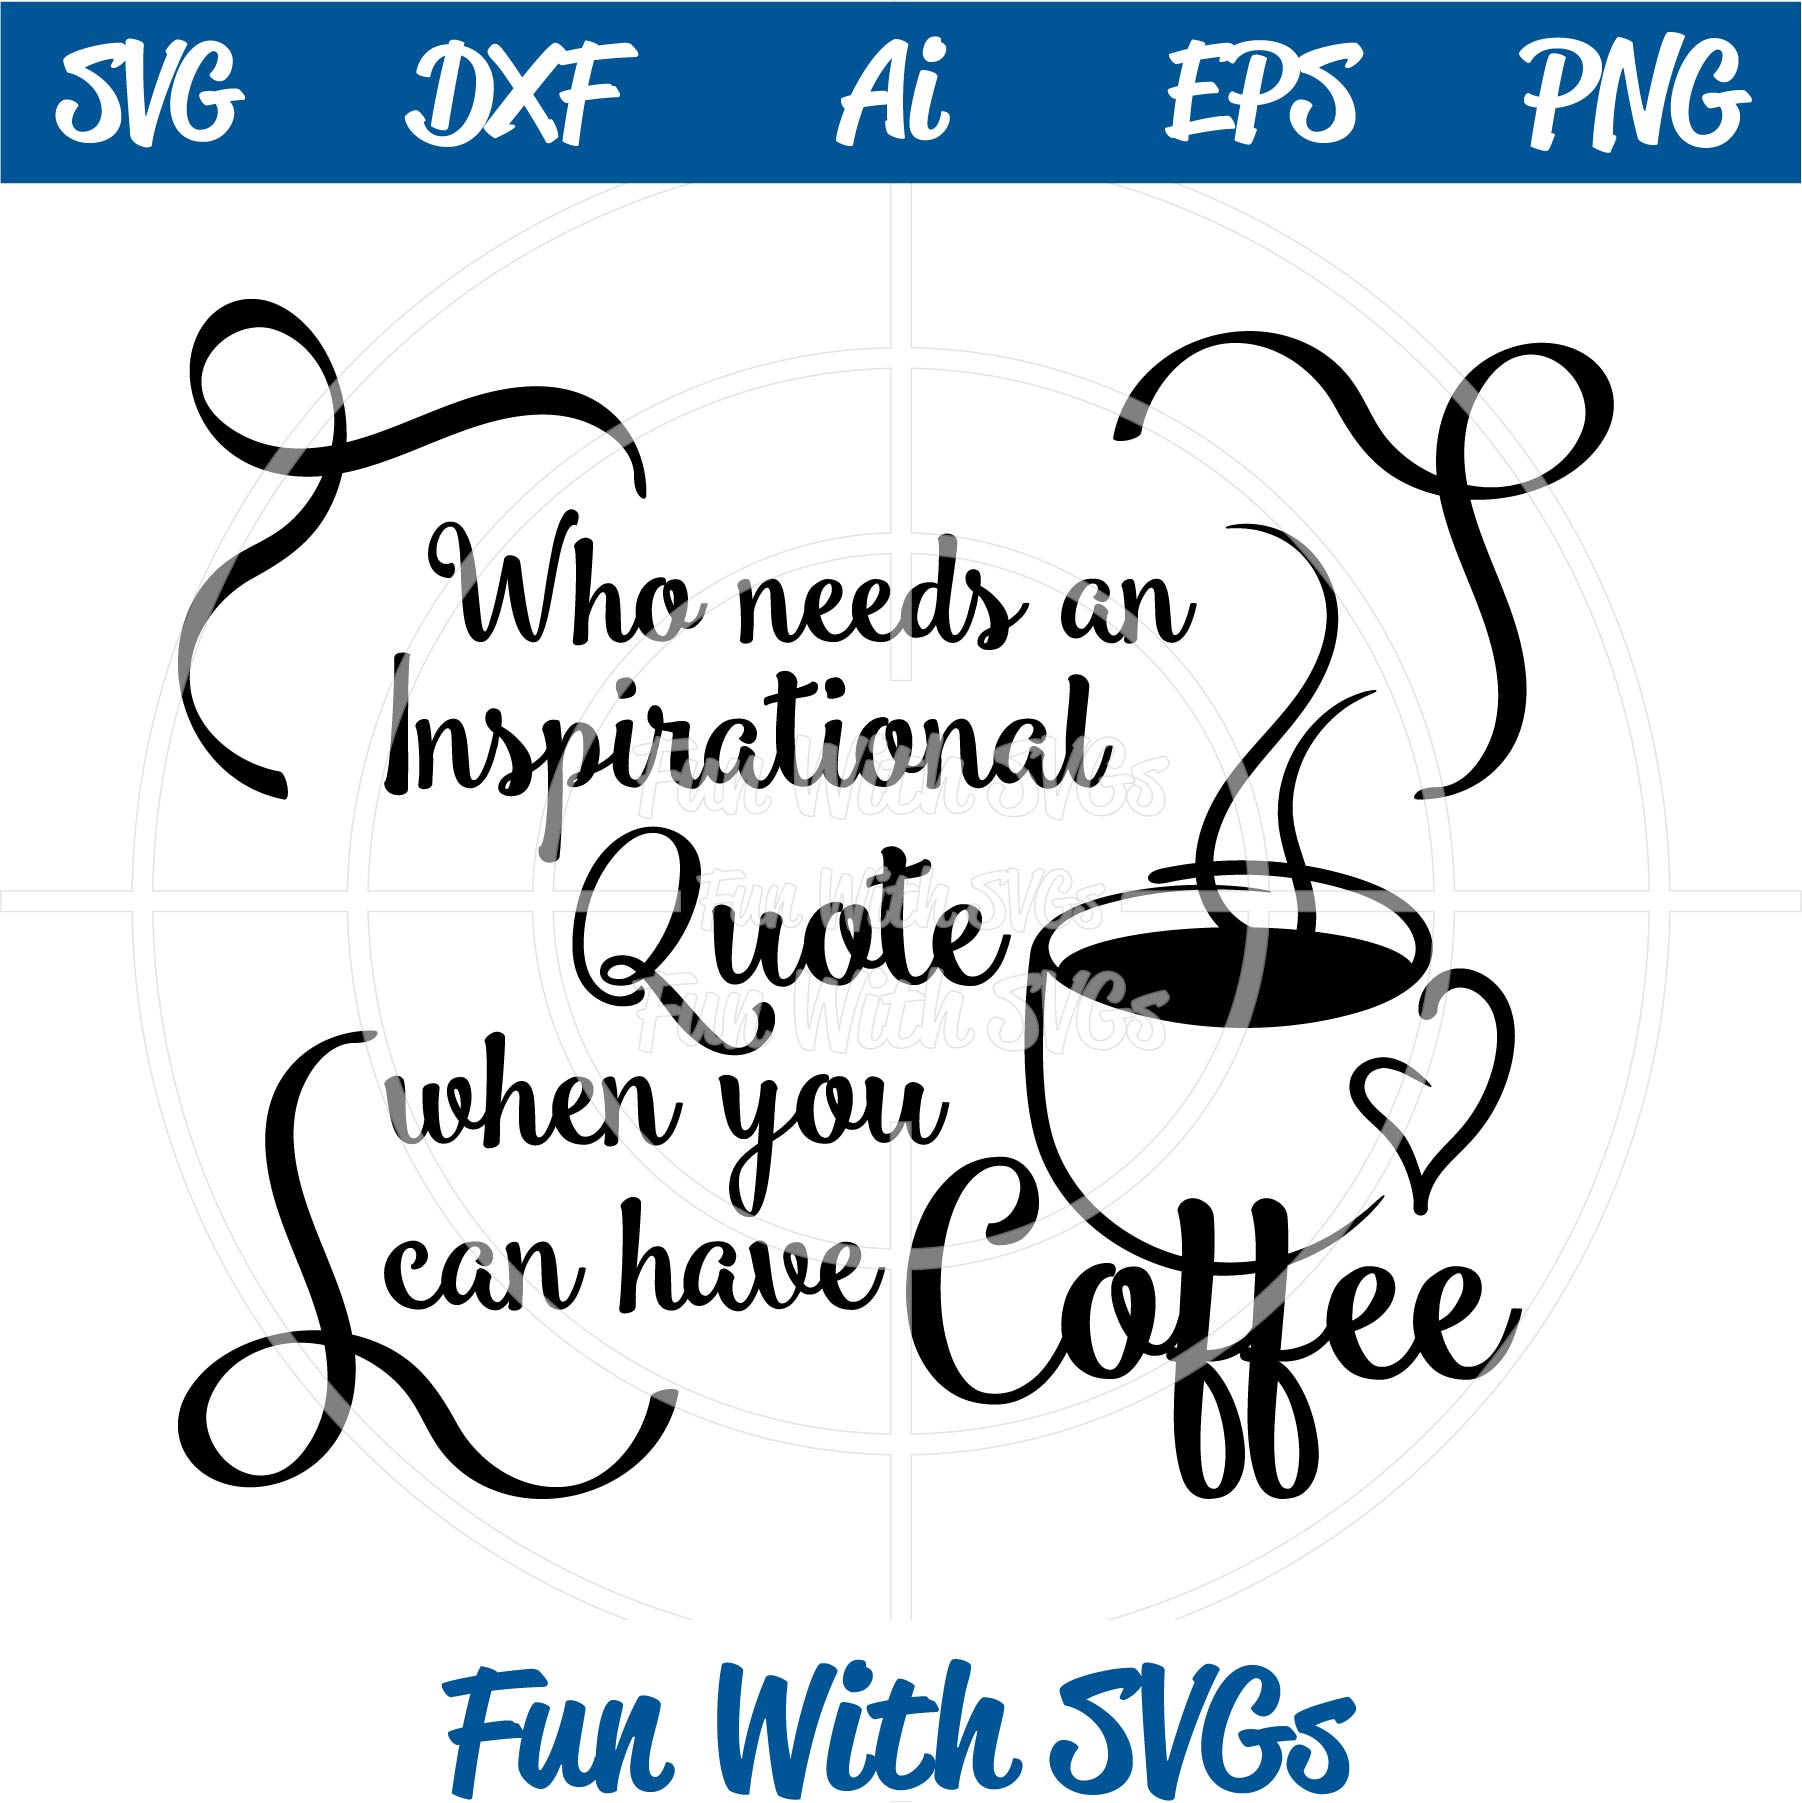 Inspirational Quote Morning Humor Fun With Svgs